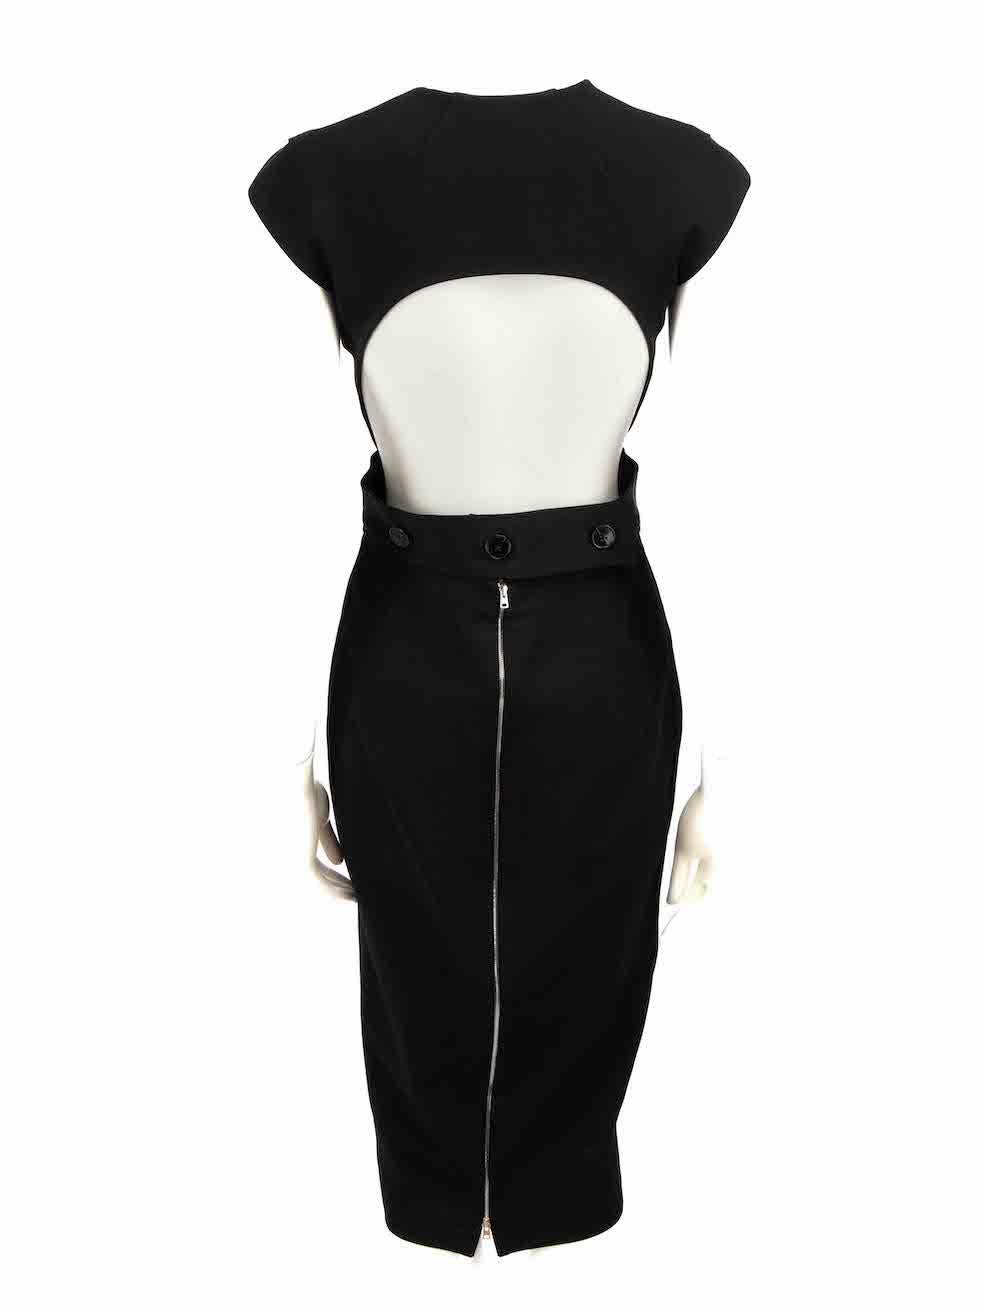 Victoria Beckham Black Open Back Midi Dress Size L In Good Condition For Sale In London, GB